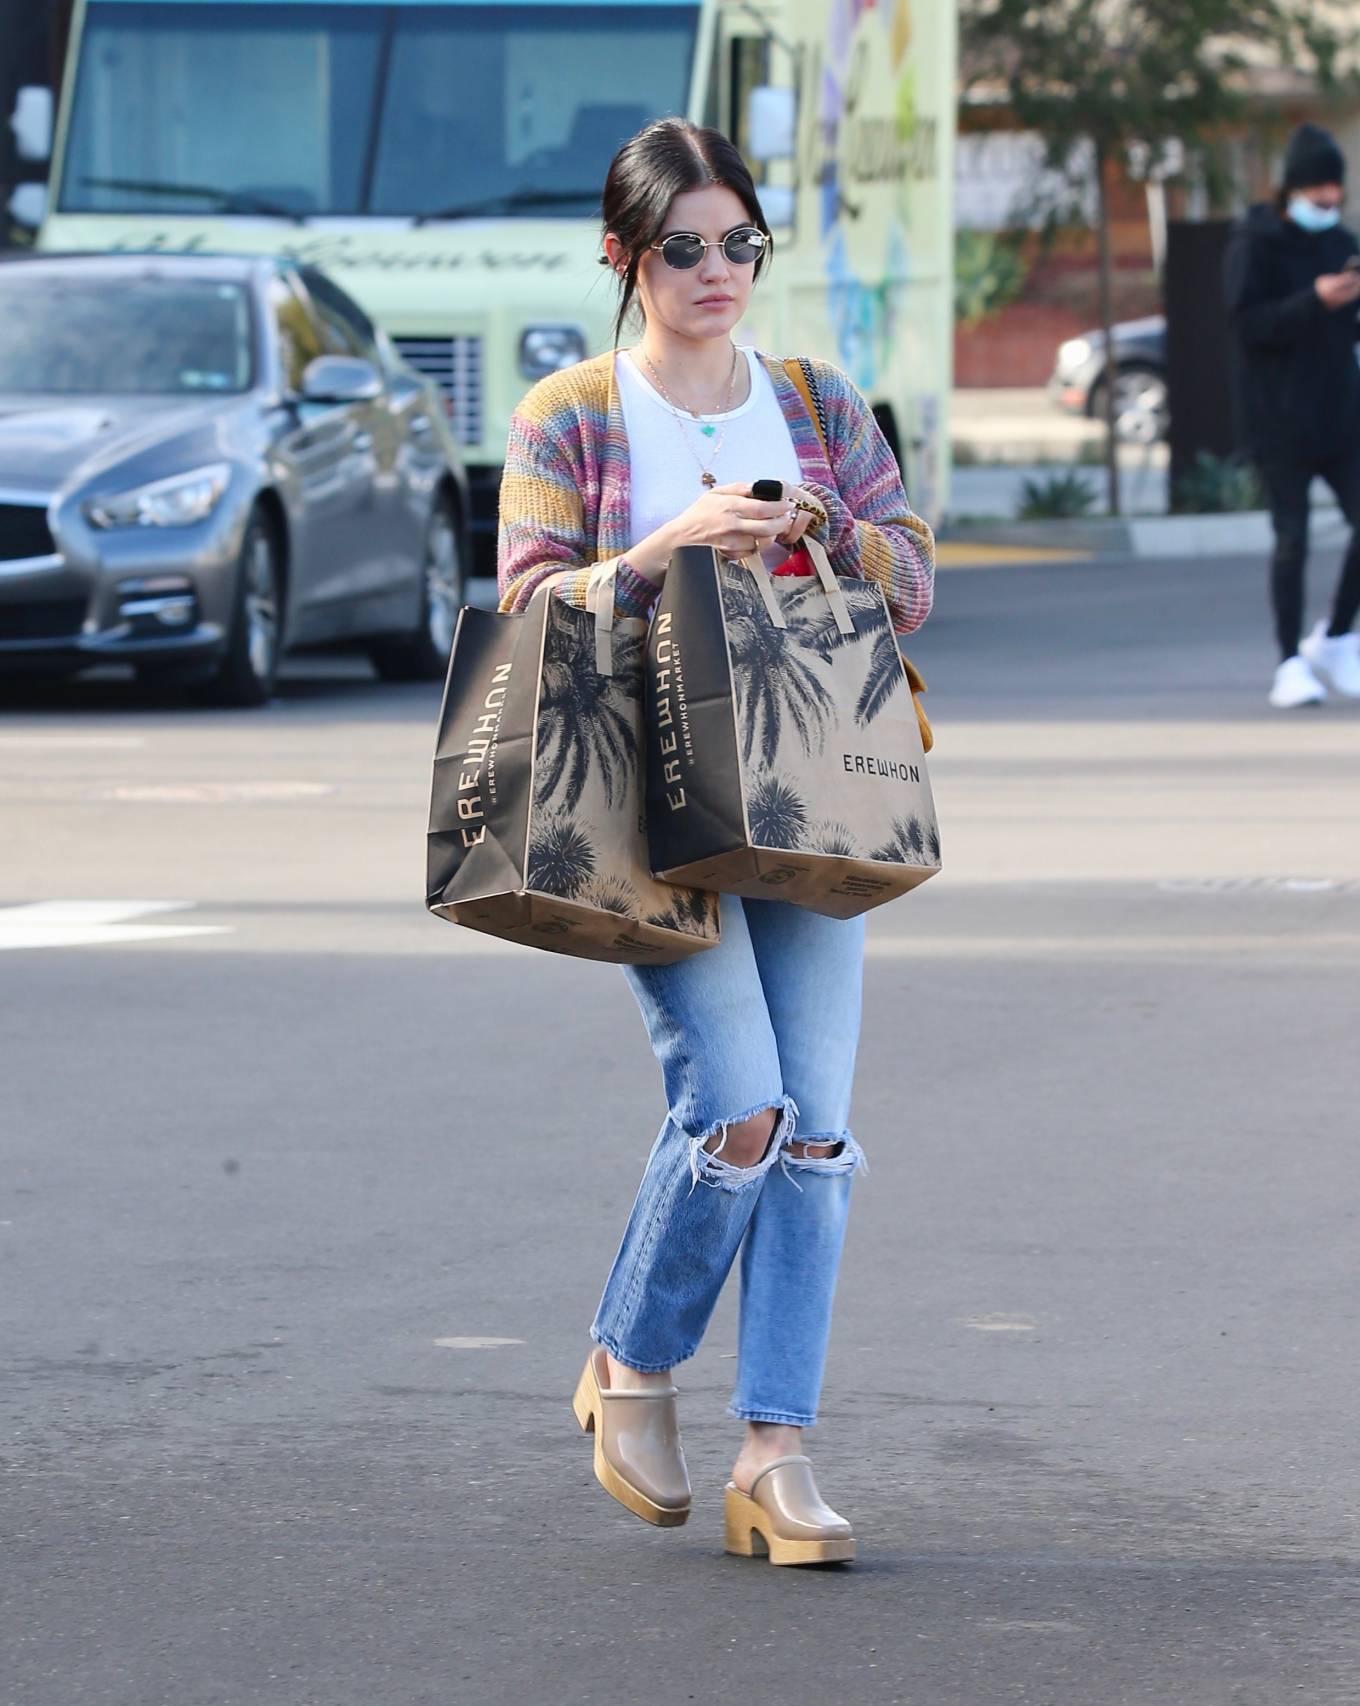 Lucy Hale 2021 : Lucy Hale – Grocery shopping at Erewhon Organic Grocers in Los Angeles-04